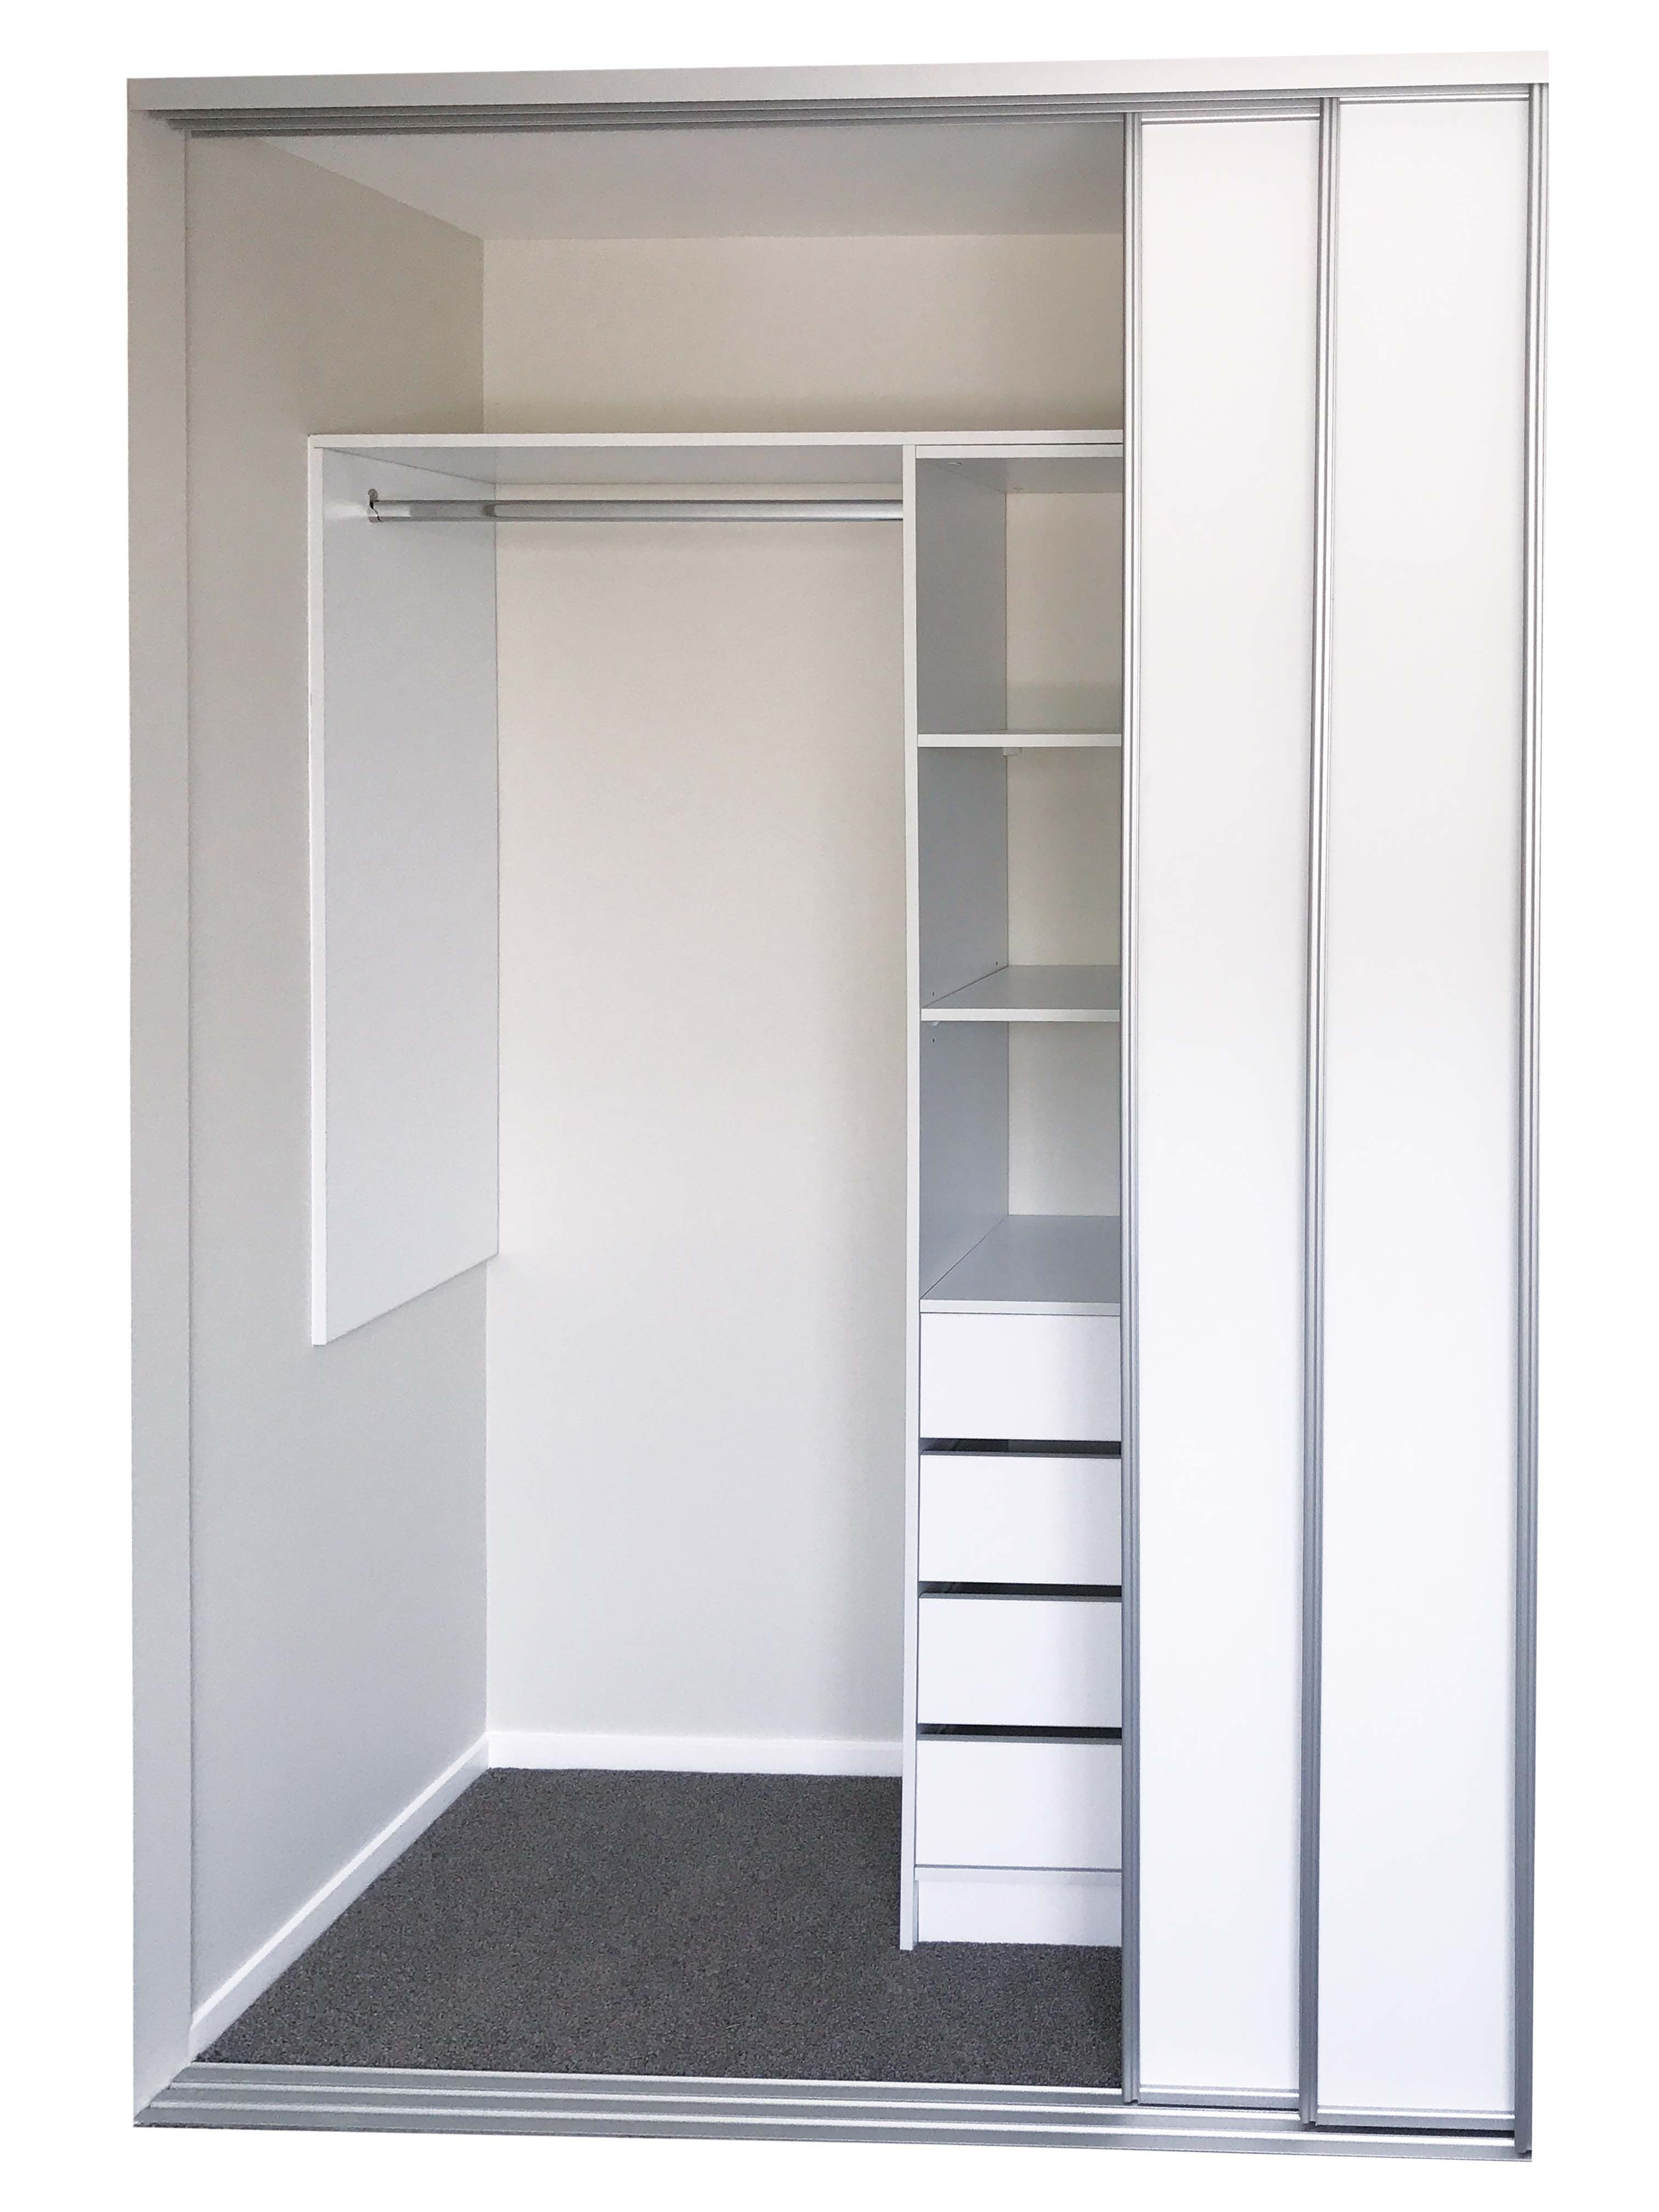 Genesis Modular Floor Standing Wardrobe Shelving | Showerwell Home Products Intended For 3 Shelving Towers Wardrobes (View 4 of 20)